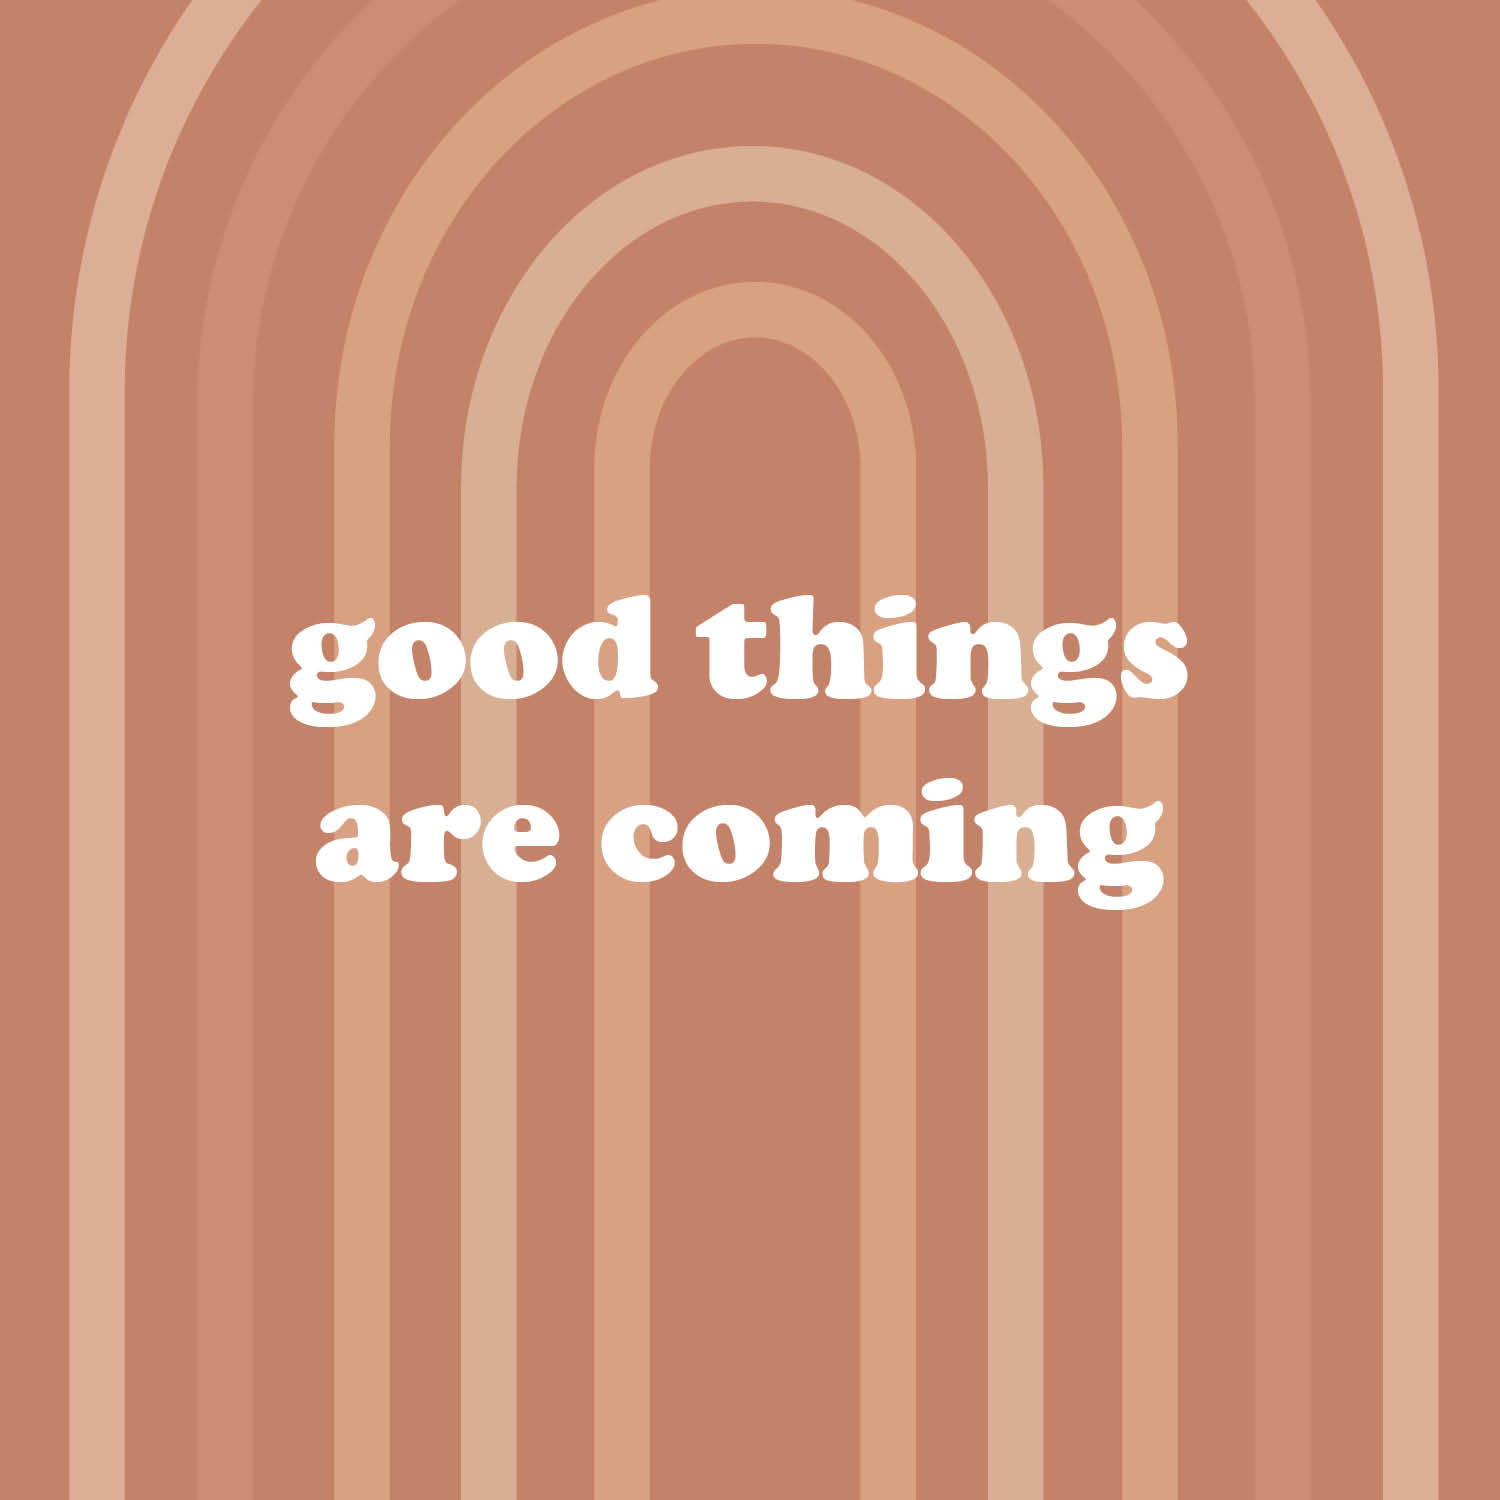 Good Things Are Coming Wallpaper Free Good Things Are Coming Background